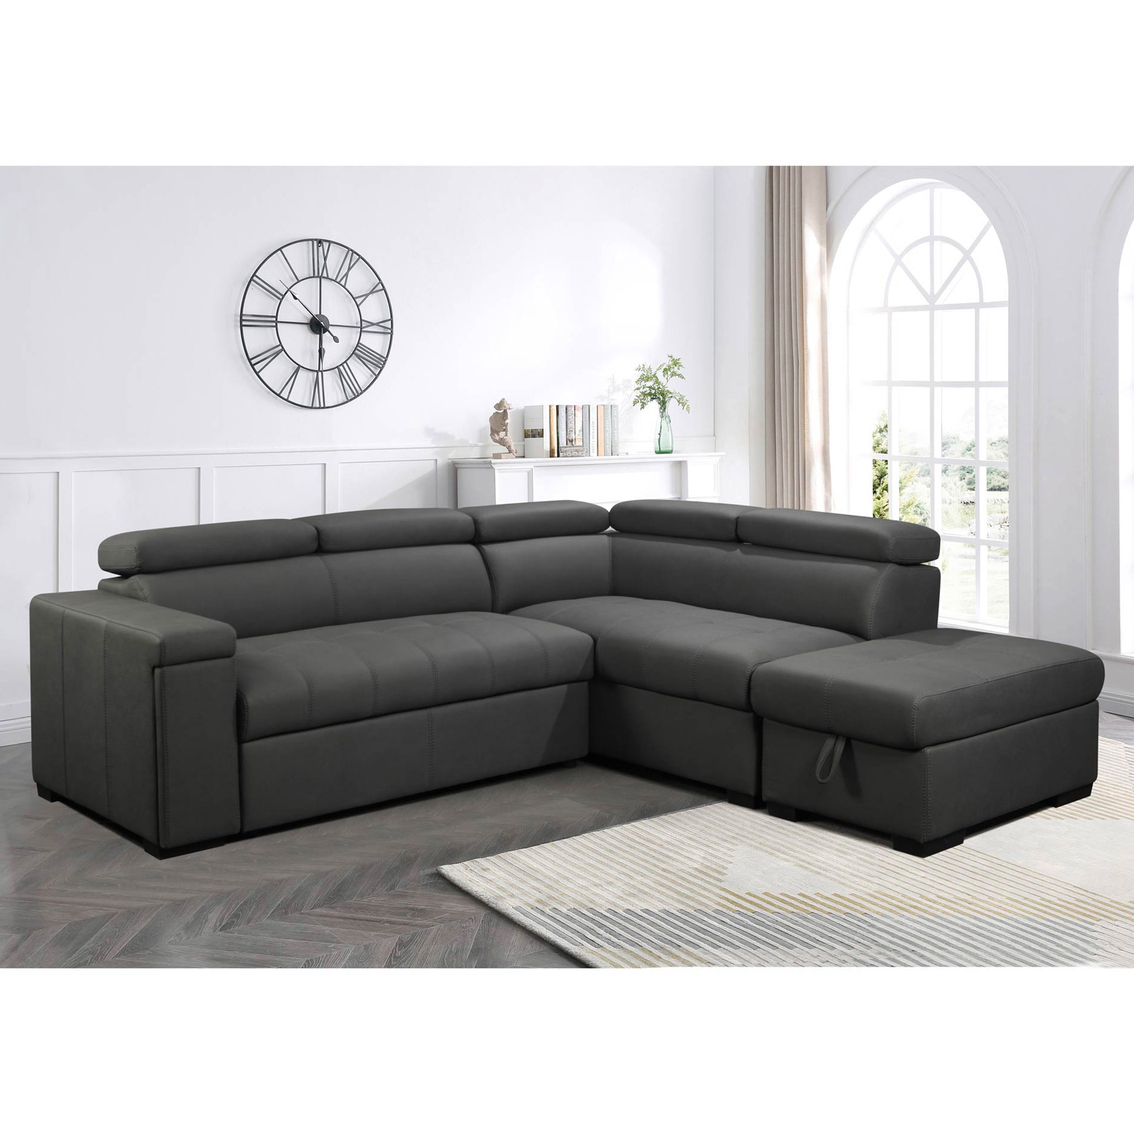 Abbyson Miami Stain Resistant Fabric Storage Sectional with Pullout Bed - Image 7 of 10